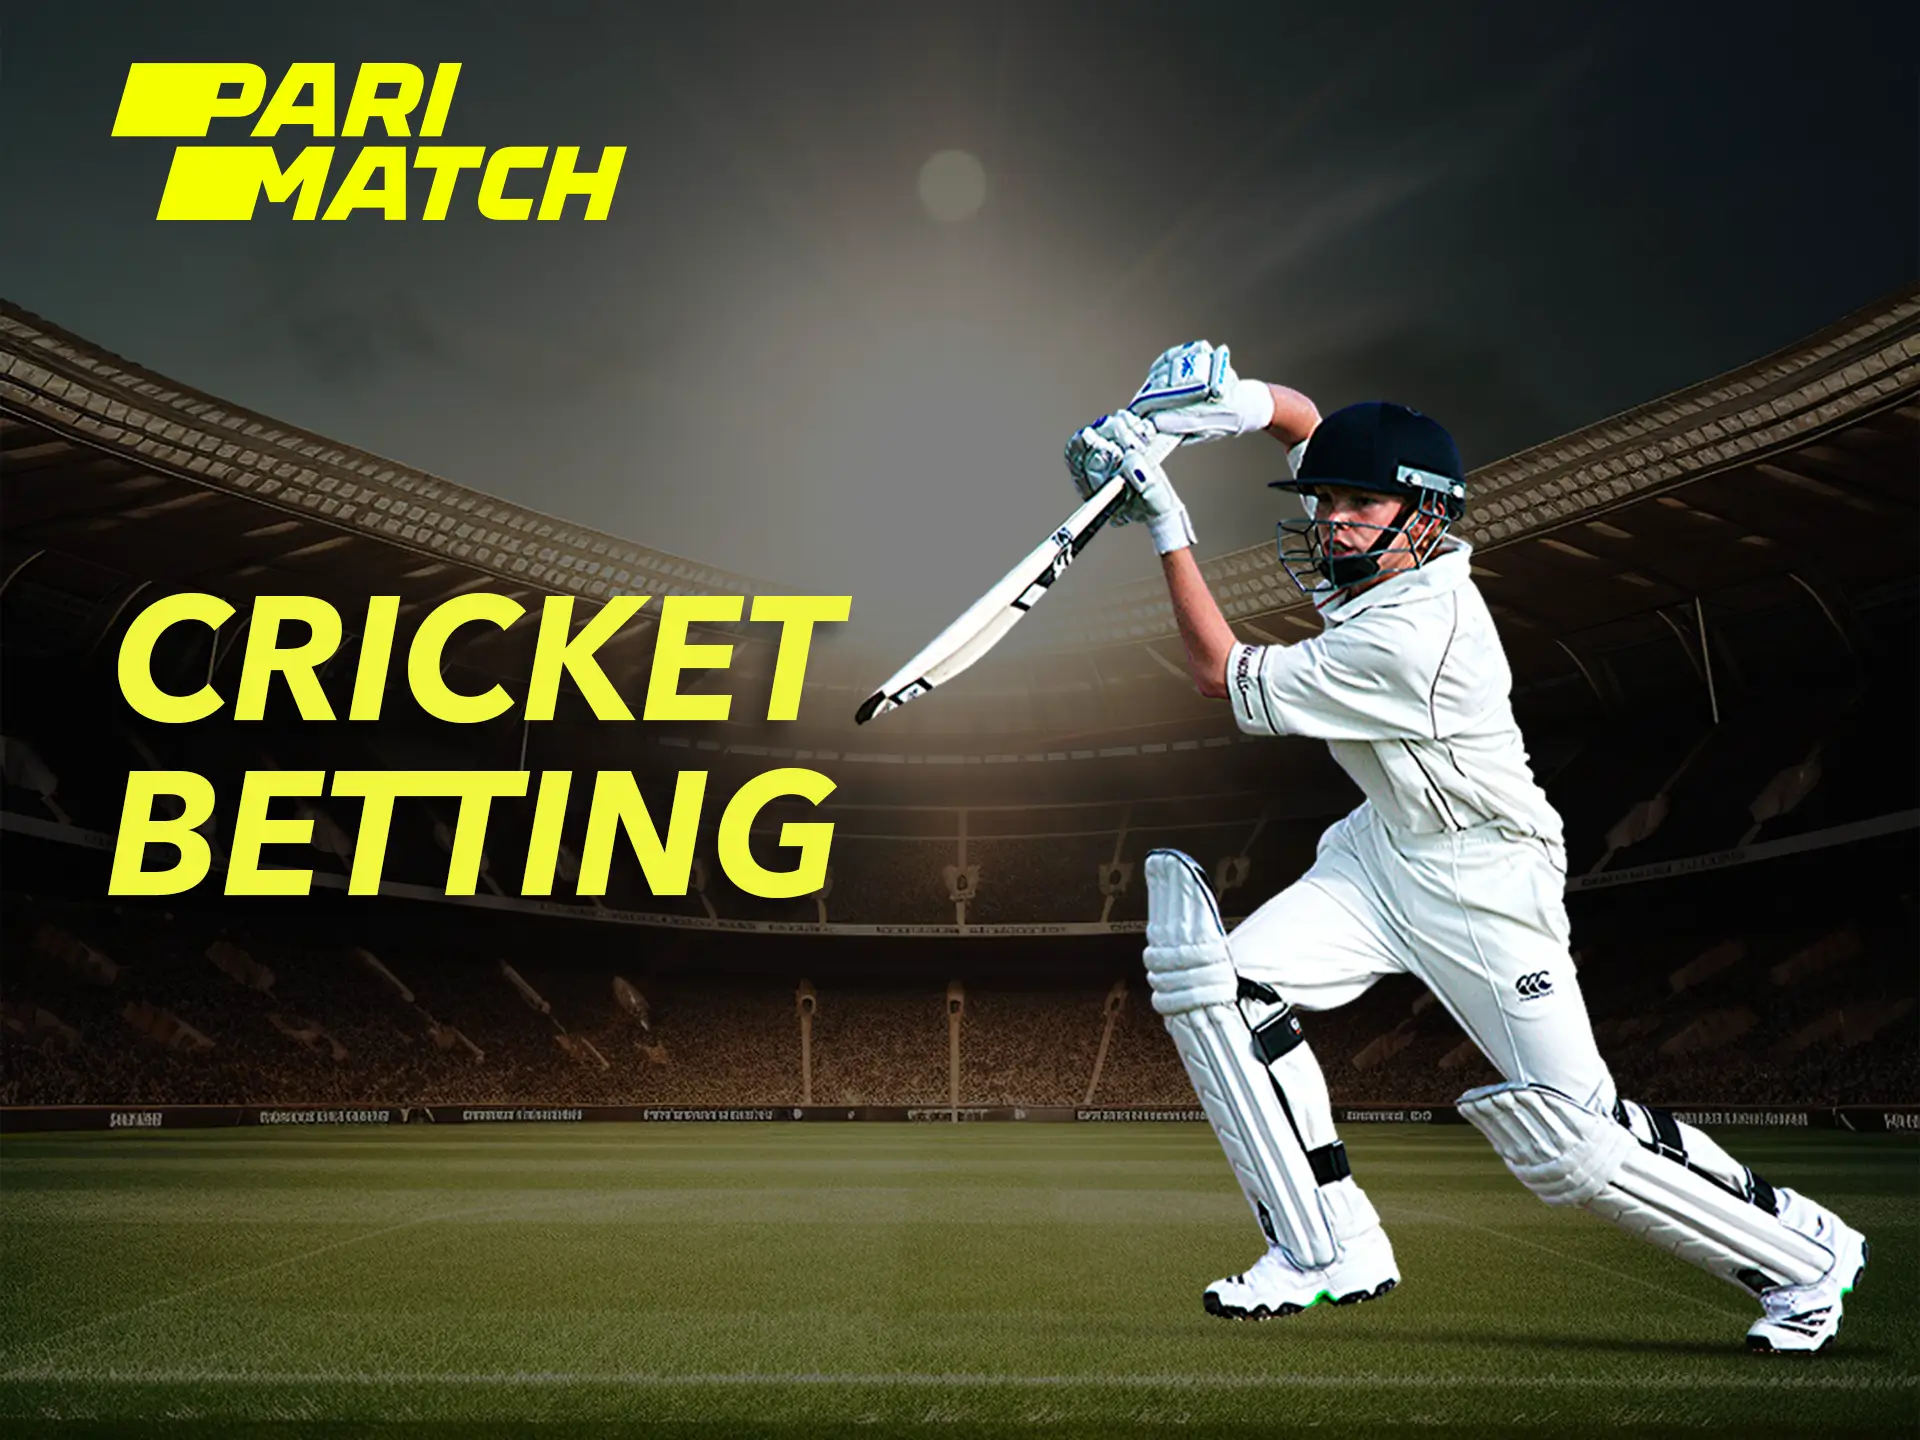 On the Parimatch website you can find many championships held on the most popular game of cricket.